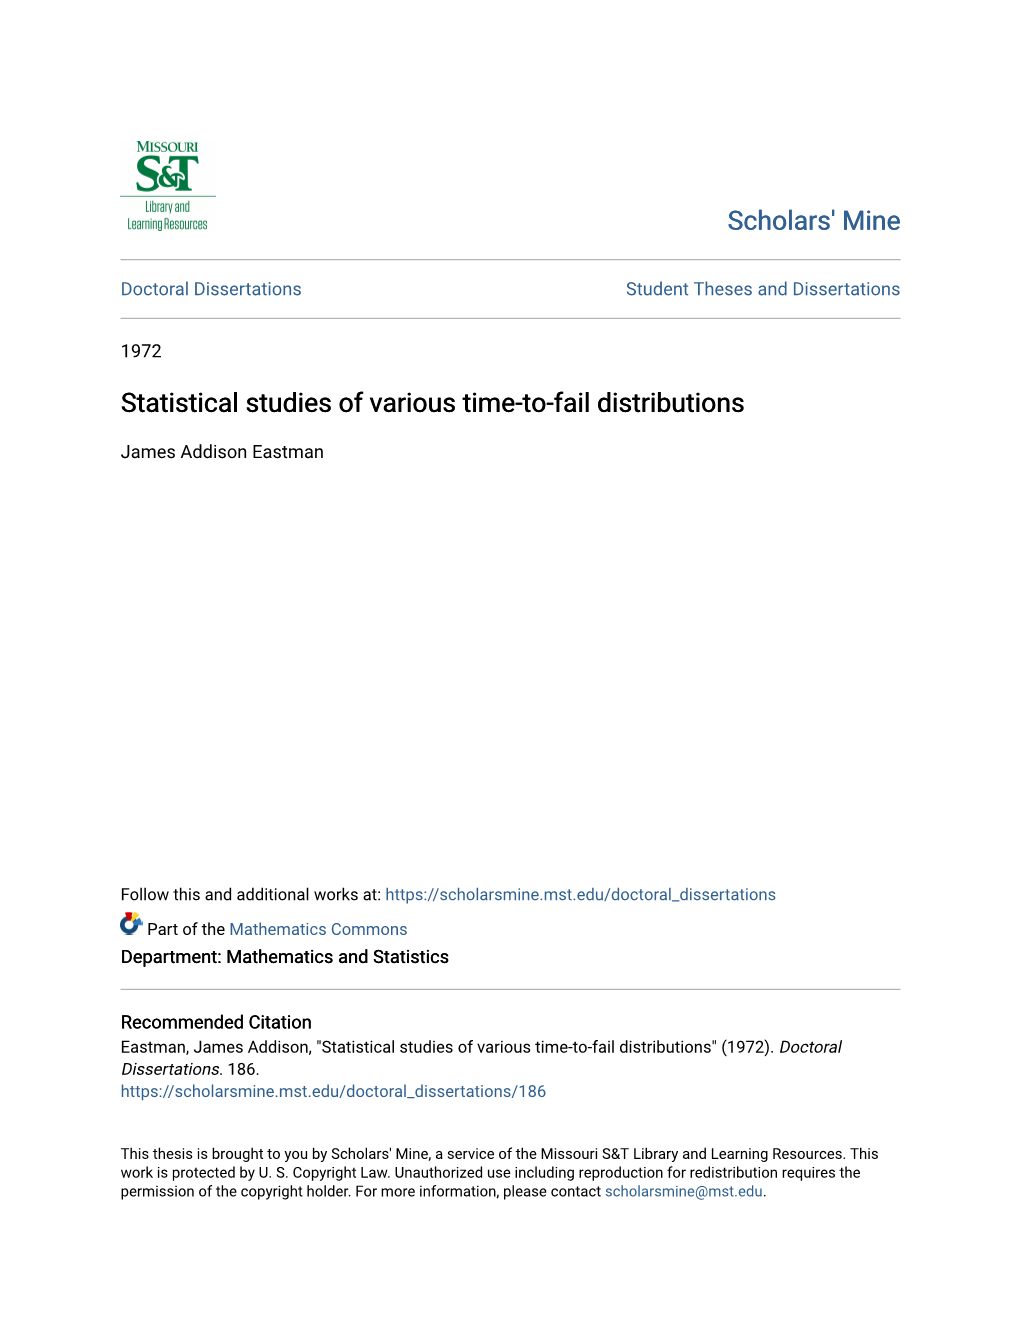 Statistical Studies of Various Time-To-Fail Distributions